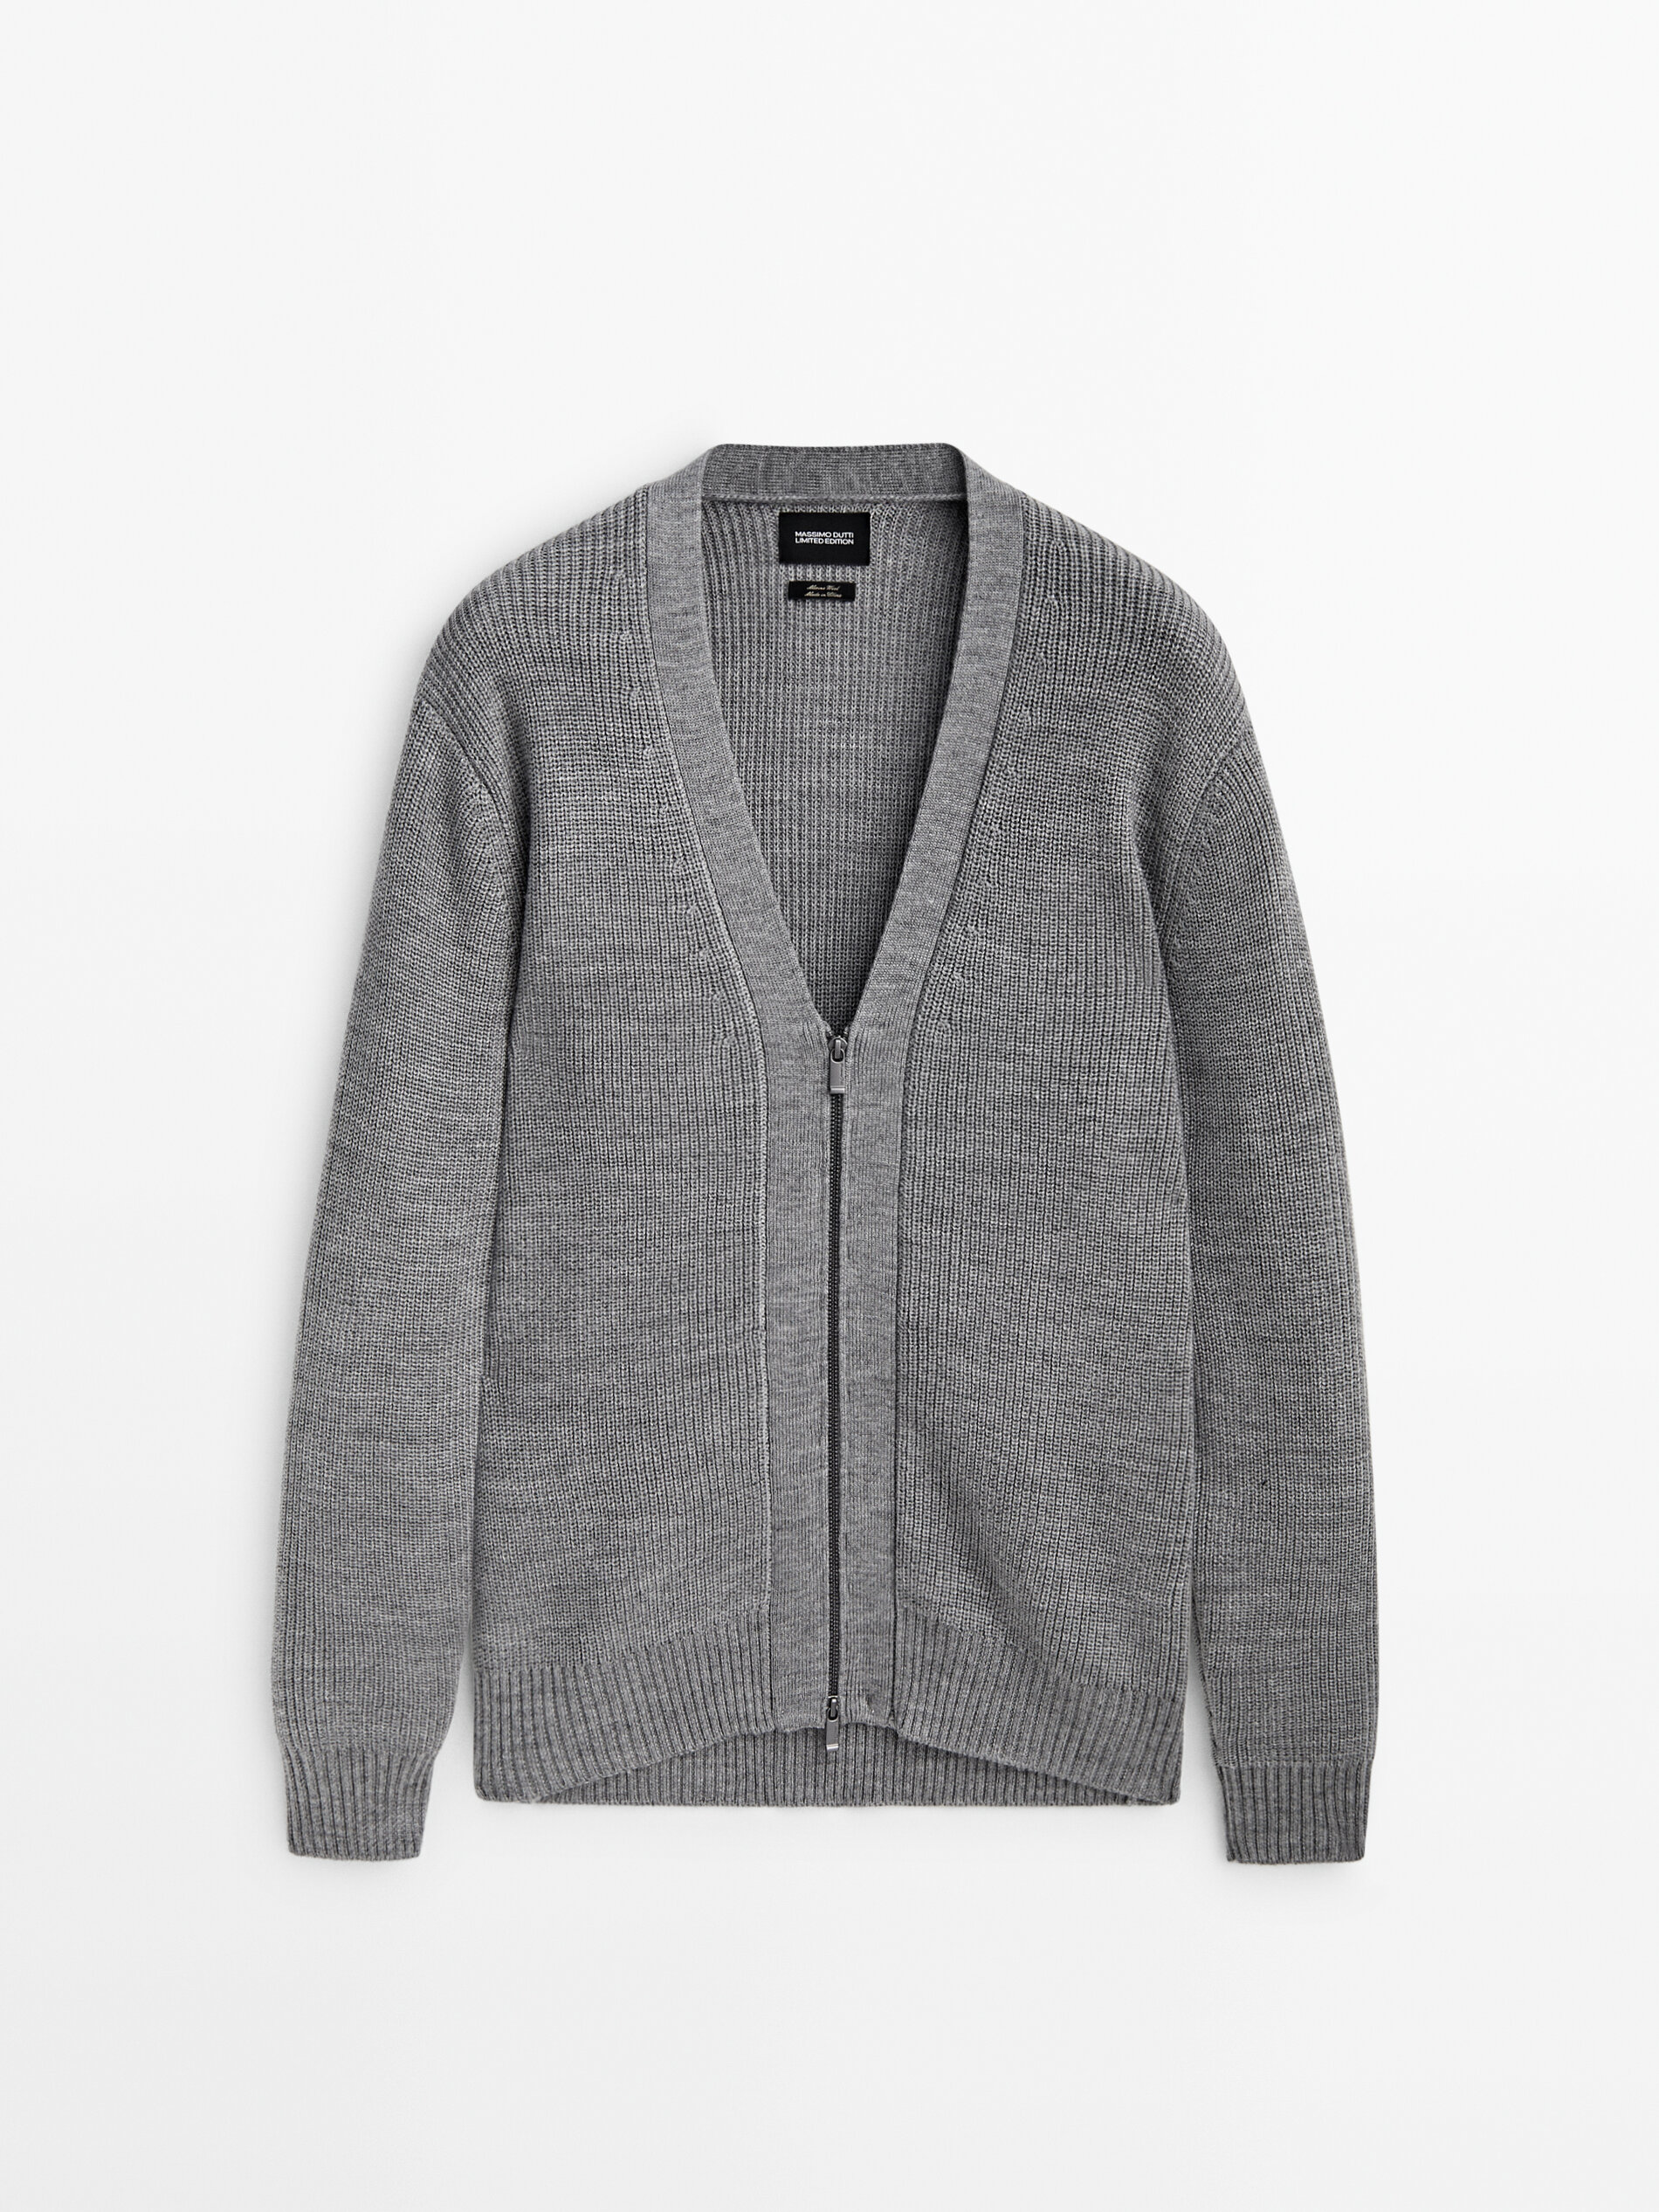 KNIT CARDIGAN WITH ZIP - LIMITED EDITION